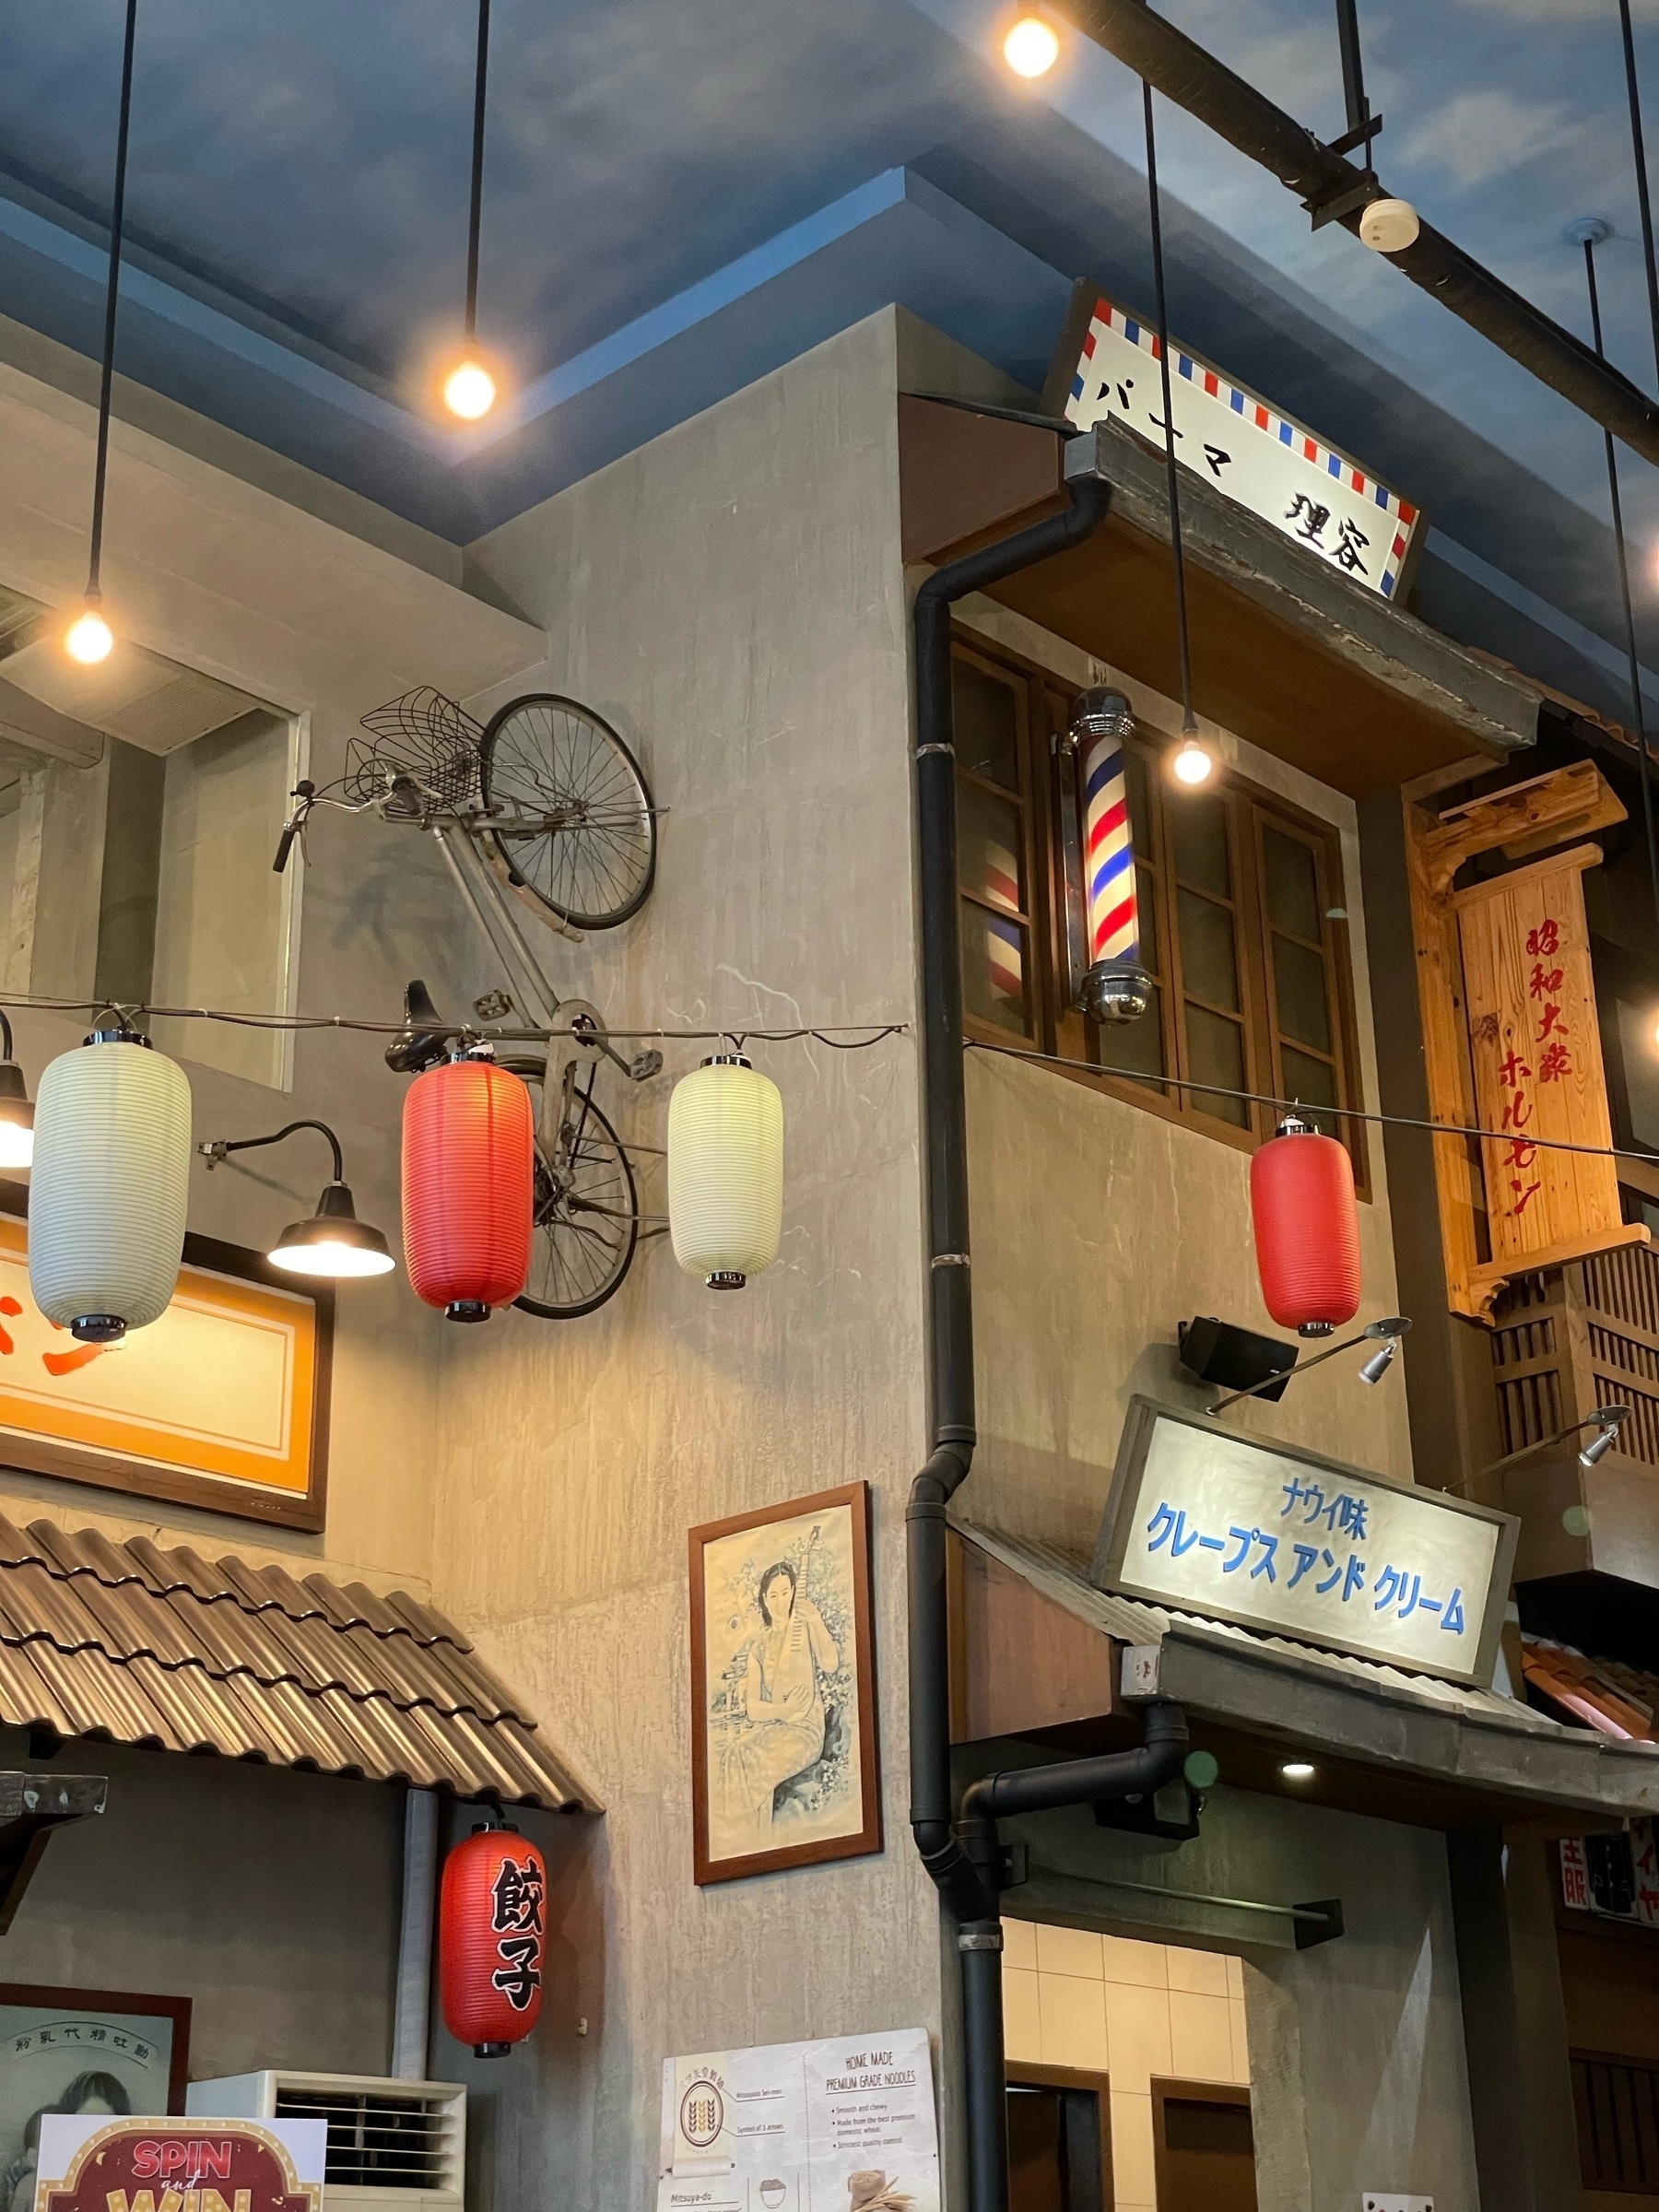 Interior of a Japanese restaurant with a bicycle aesthetically glued to the wall